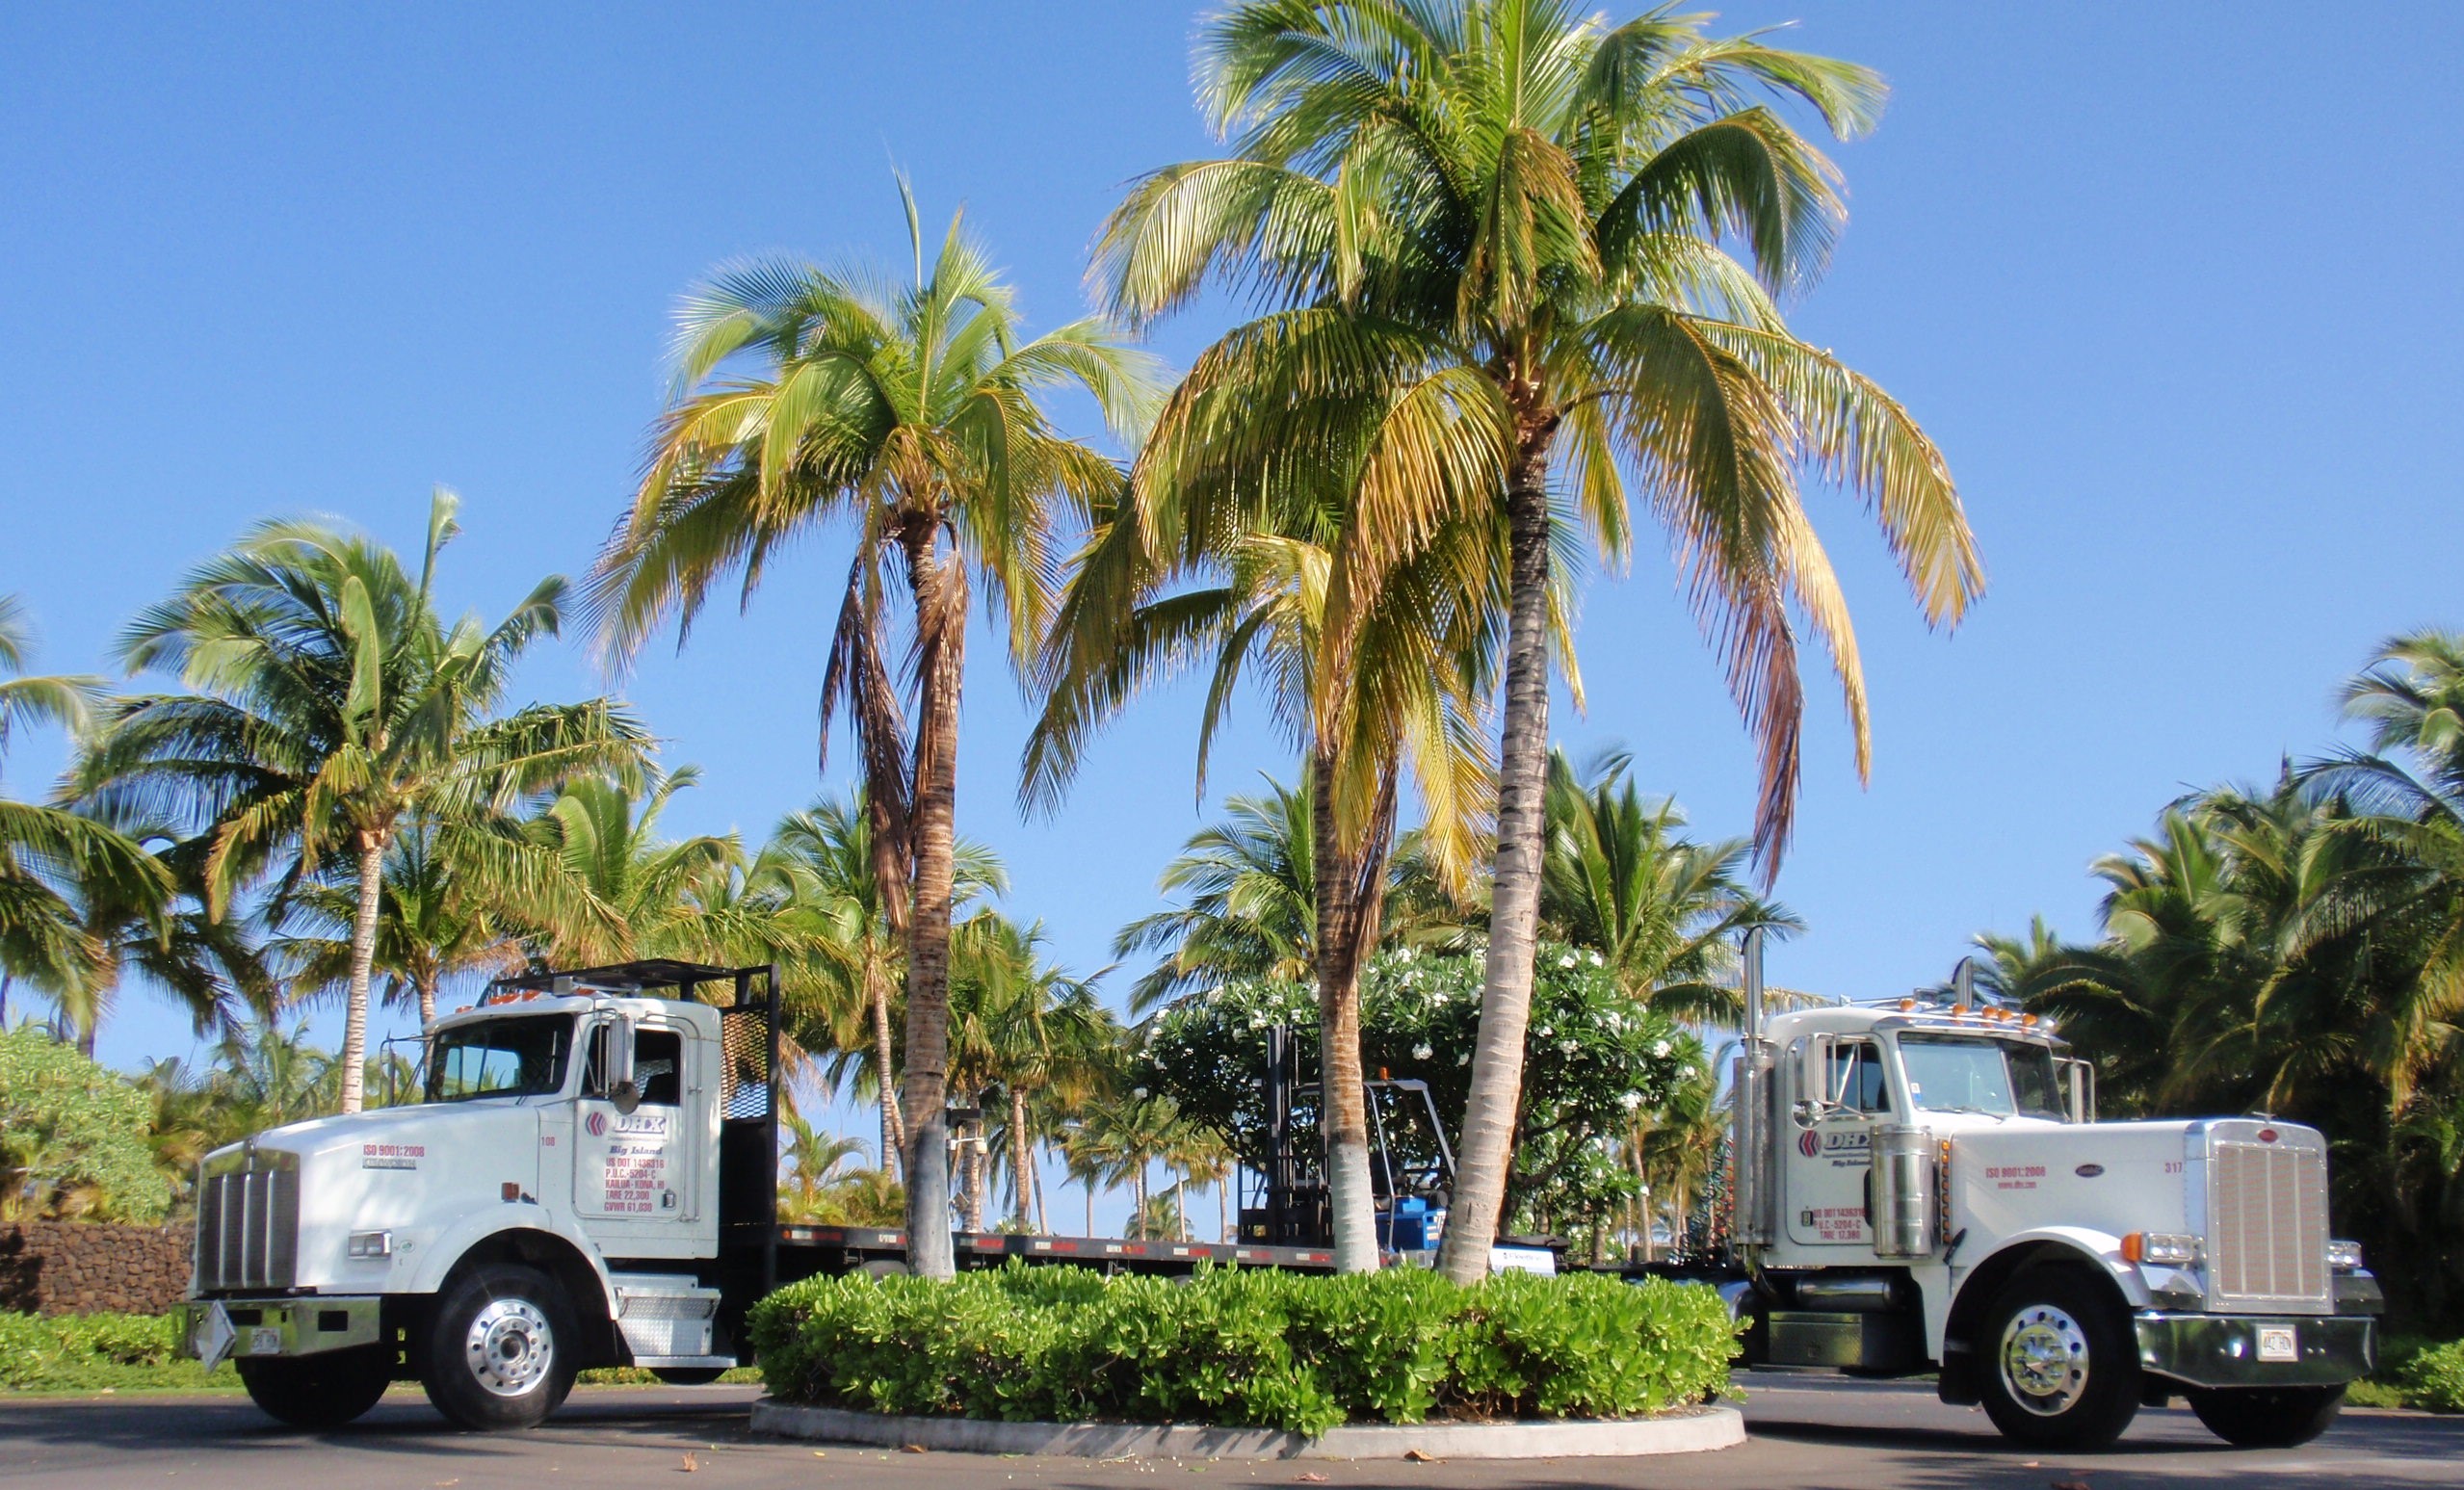 Trucking in Hawaii isn't quite the paradise it may seem.